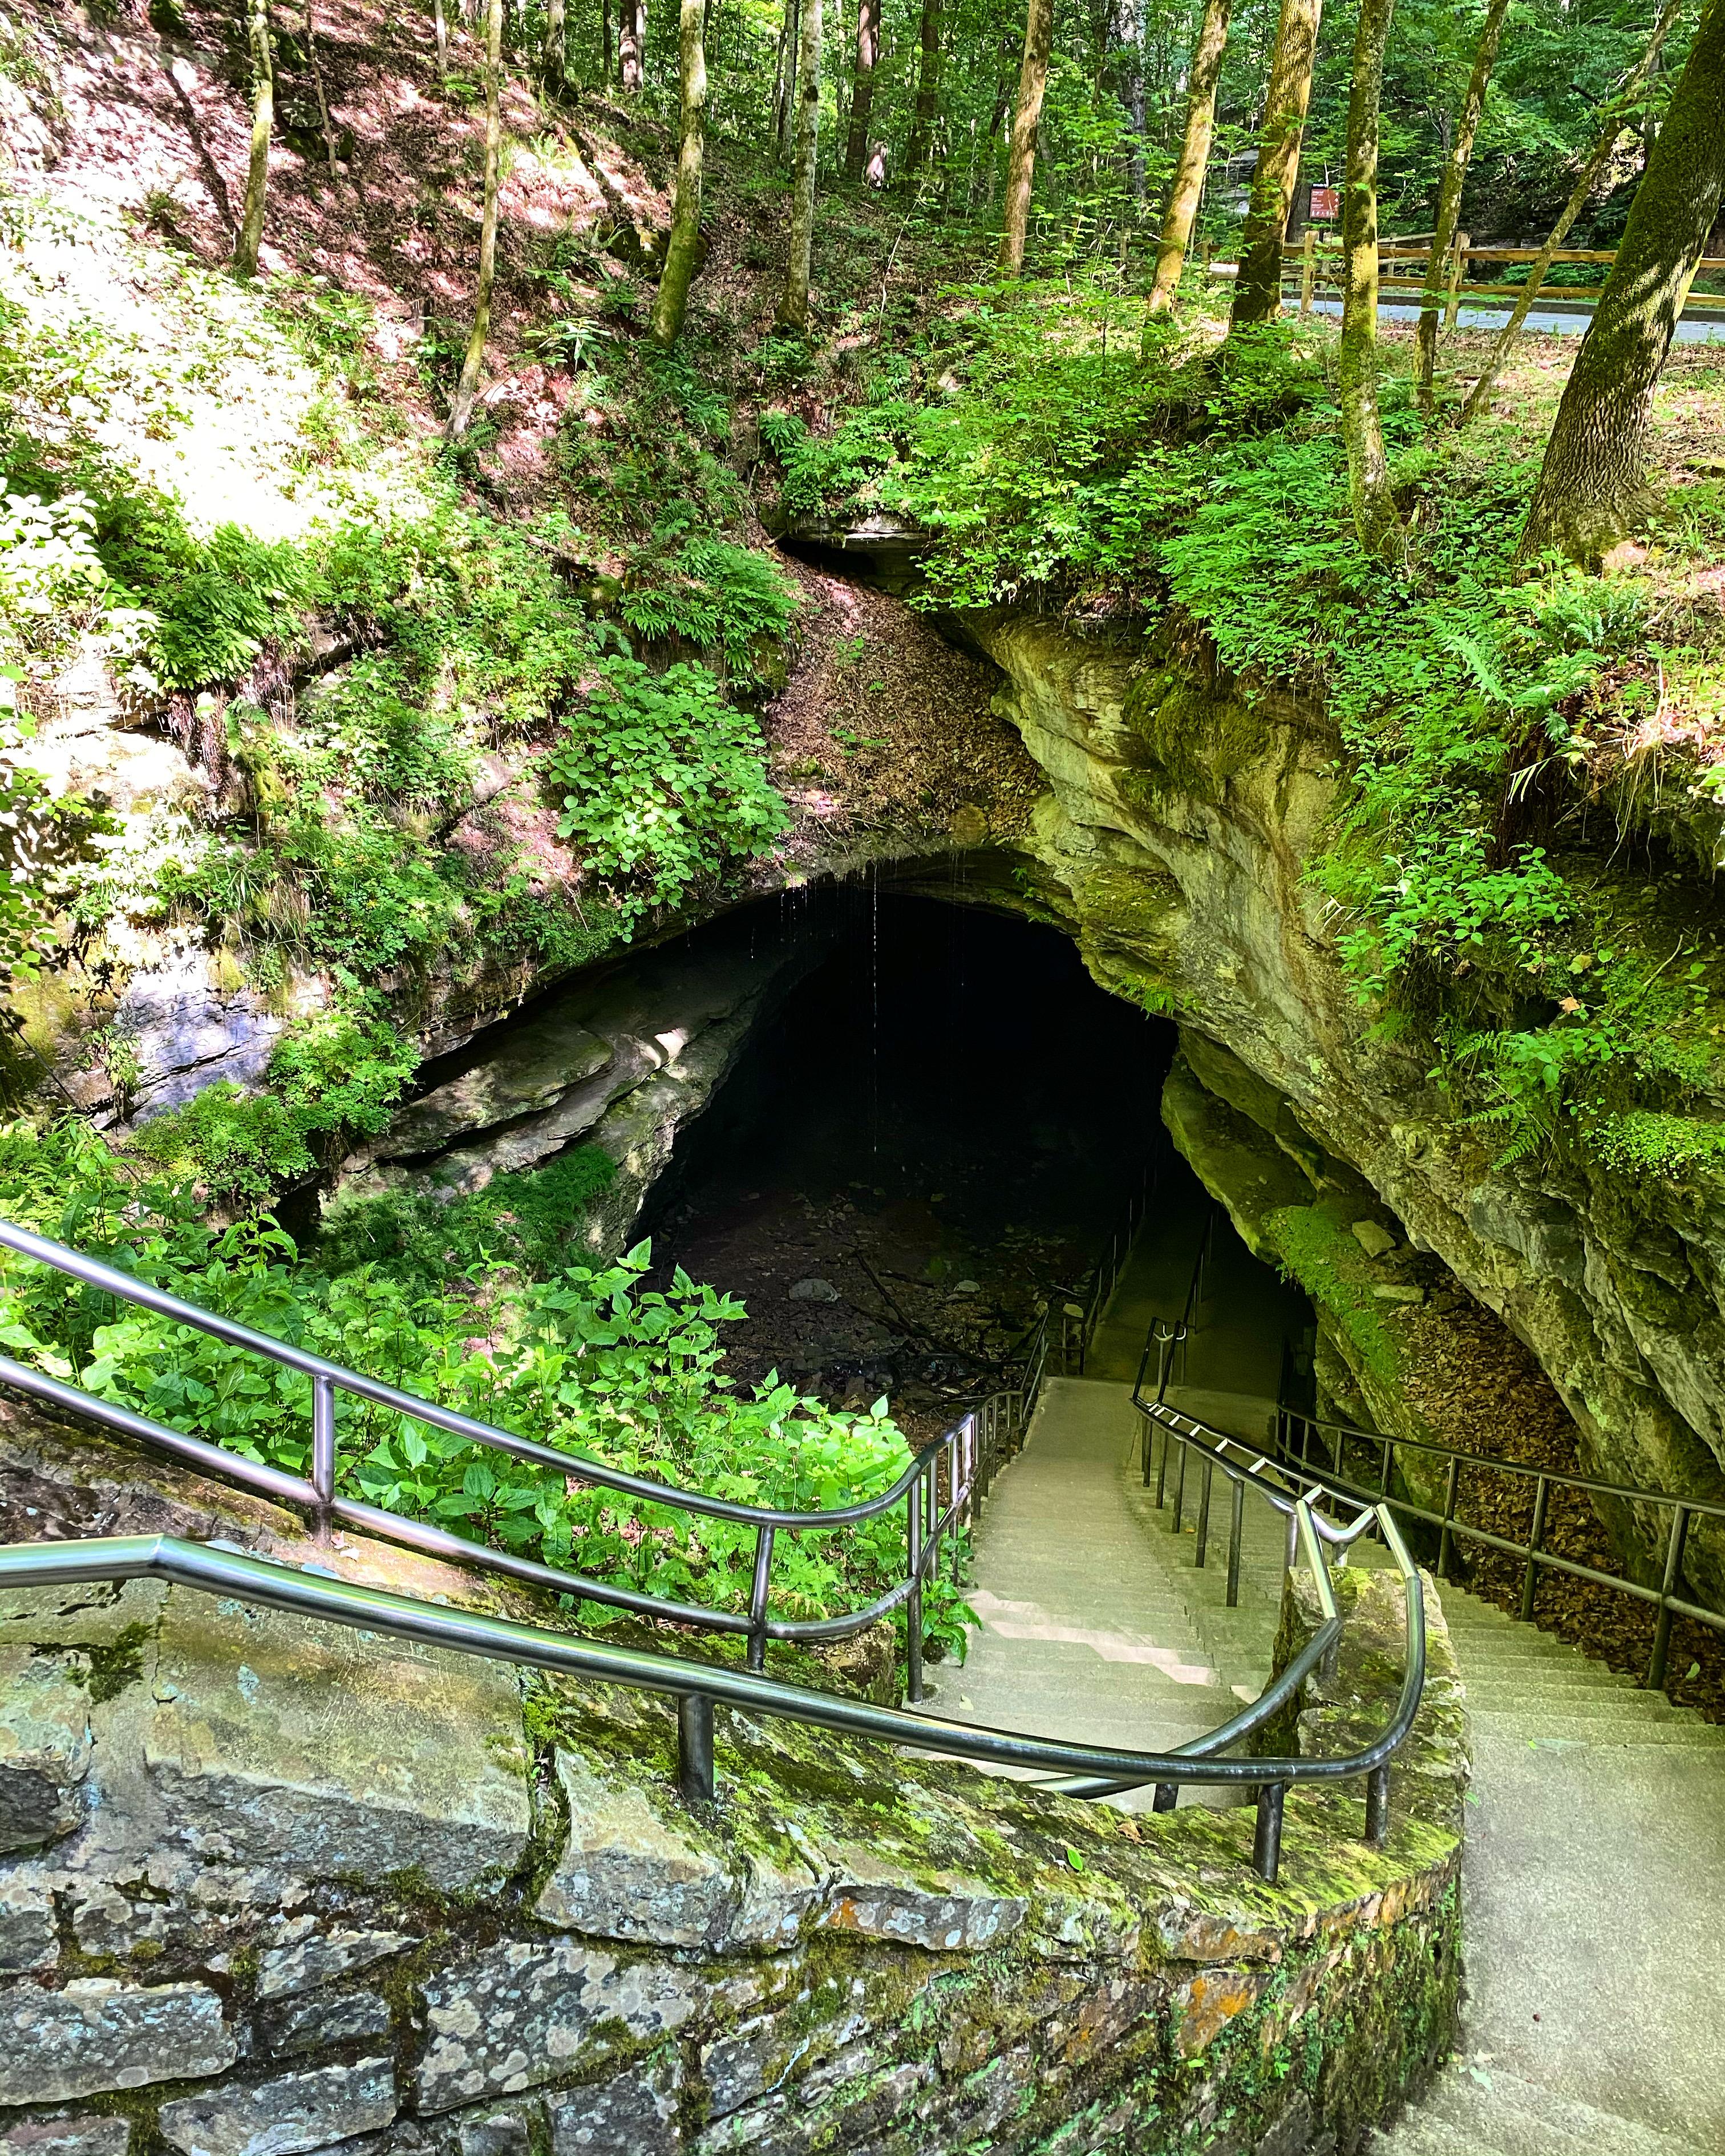 A long staircase travels down a slope into the dark cave opening.